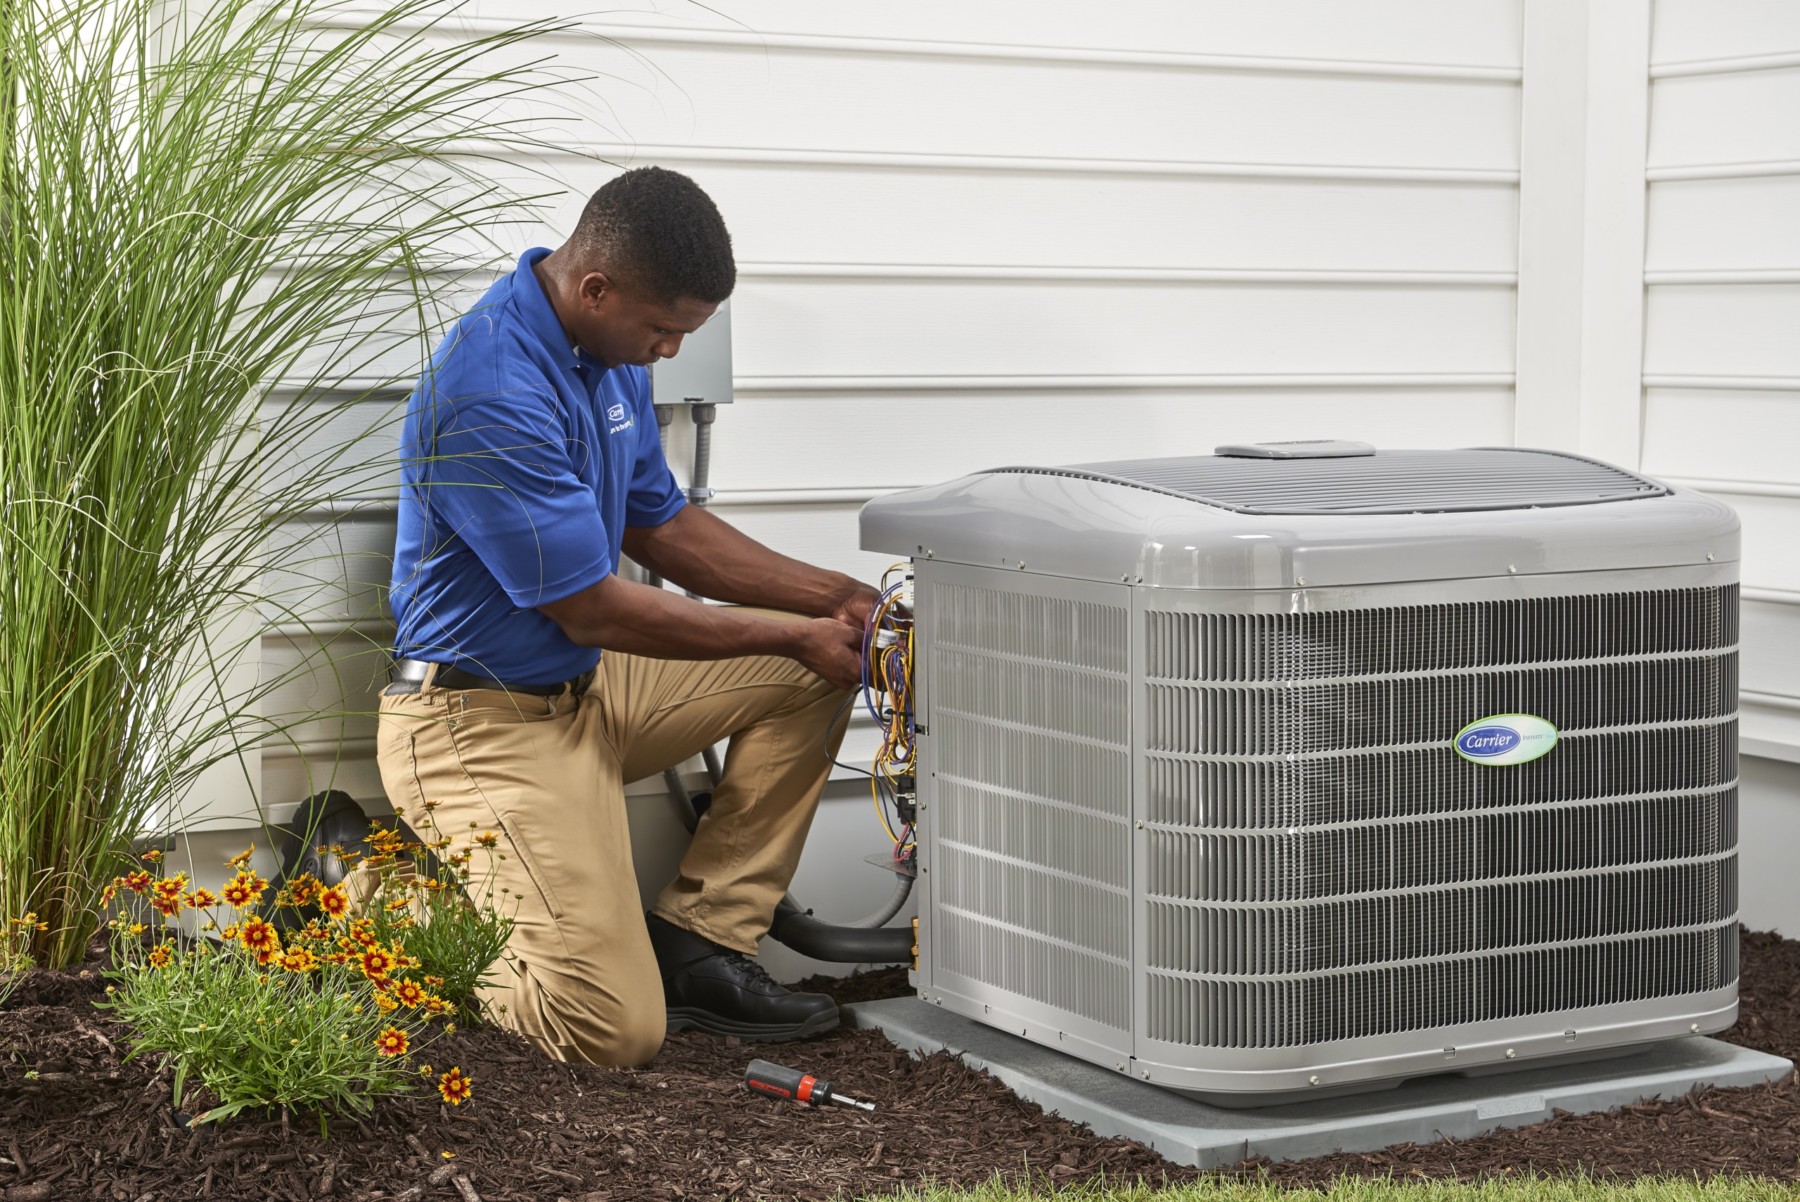 What is a BTU in an air conditioner